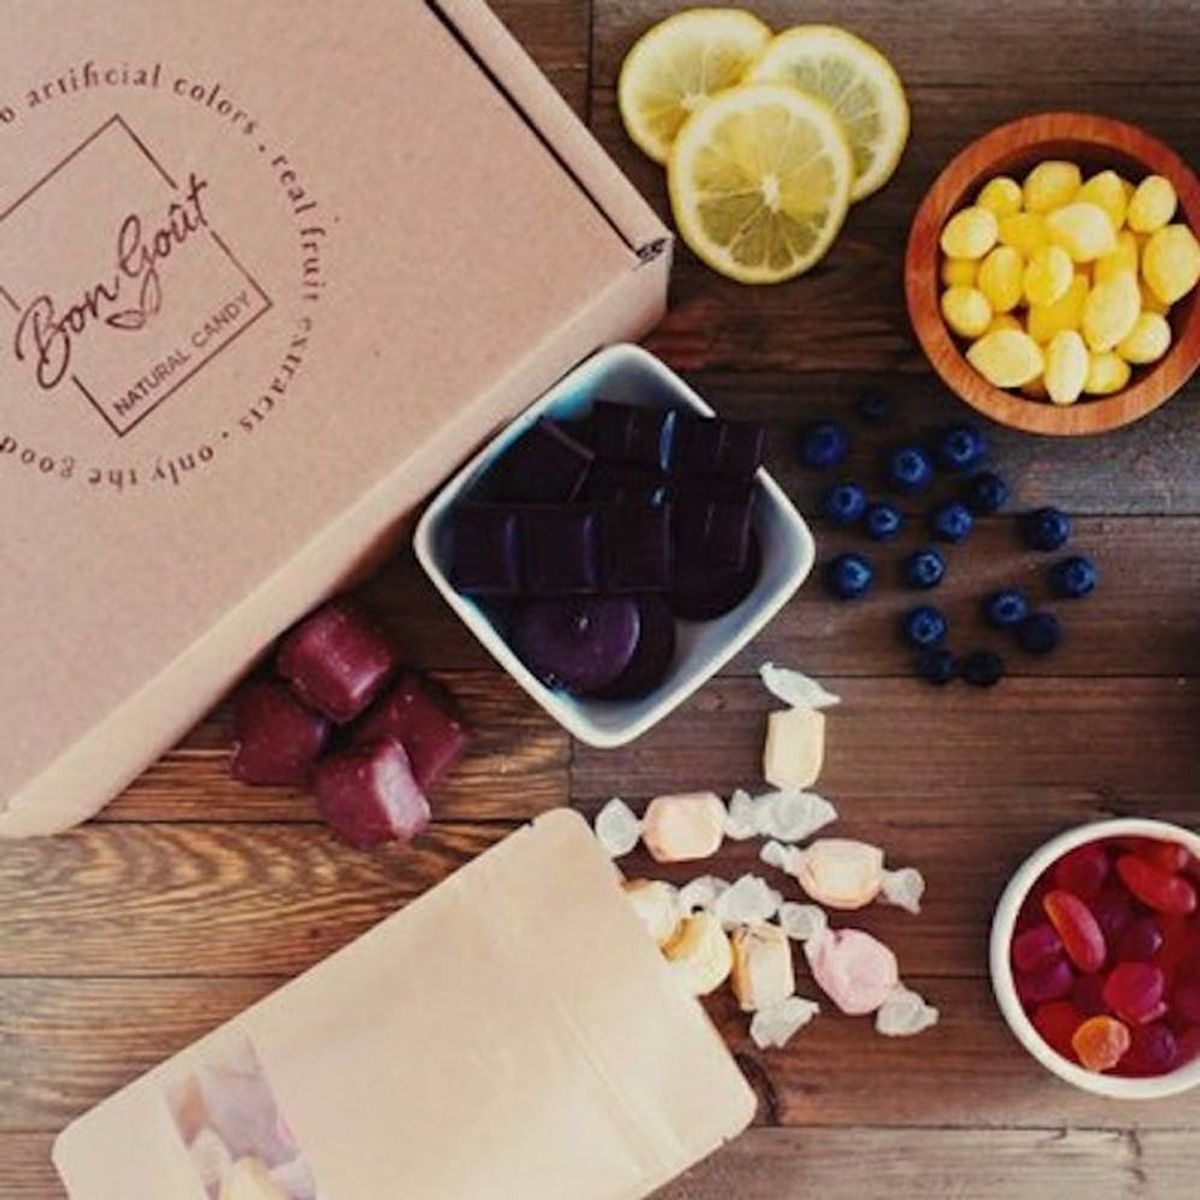 12 Organic Subscription Boxes That Are *Actually* Good for You